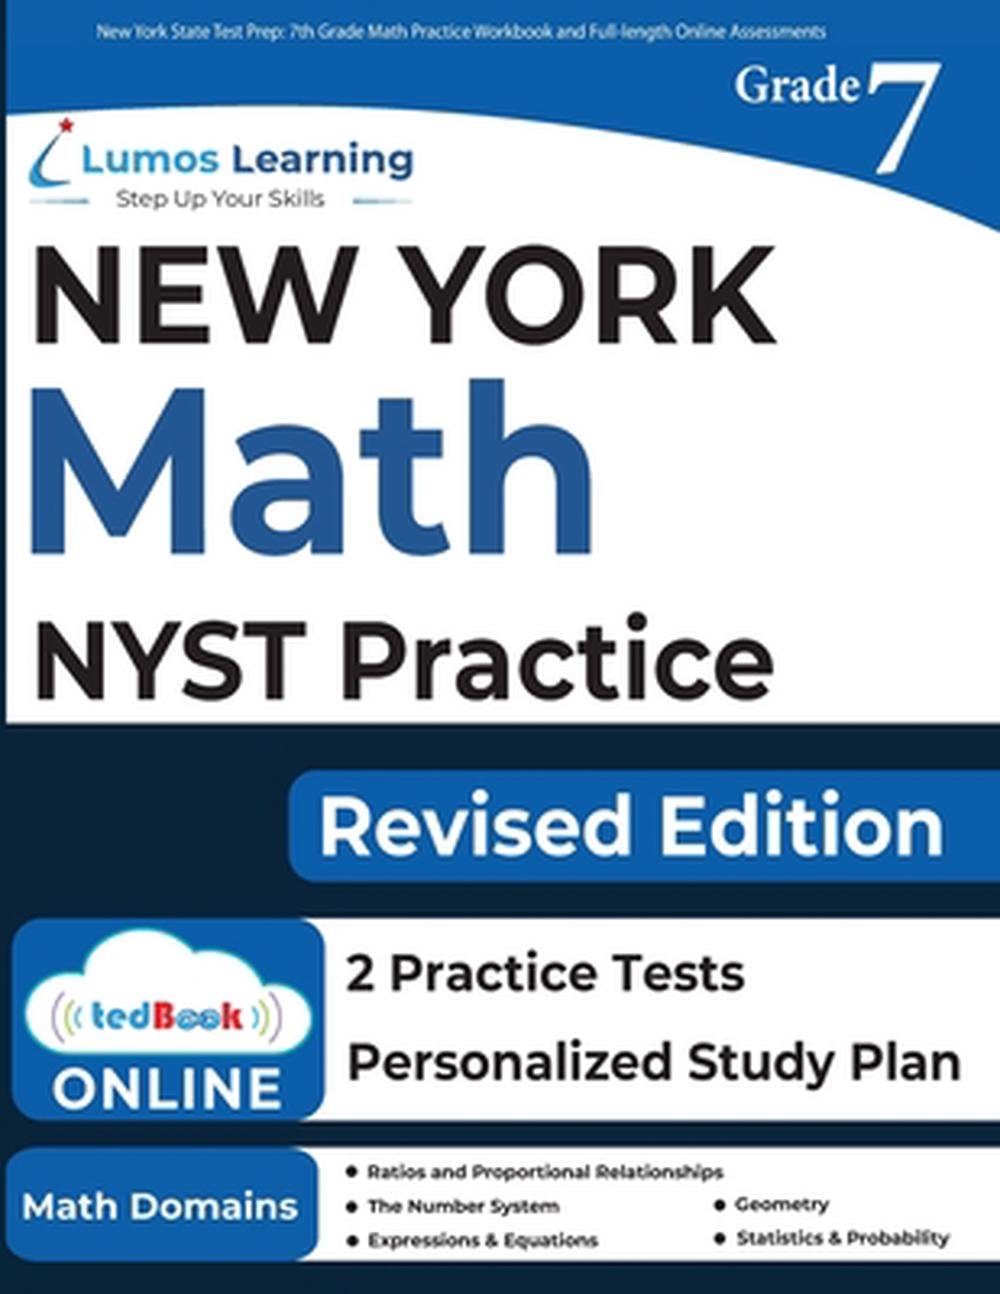 New York State Test Prep 7th Grade Math Practice Workbook and Full